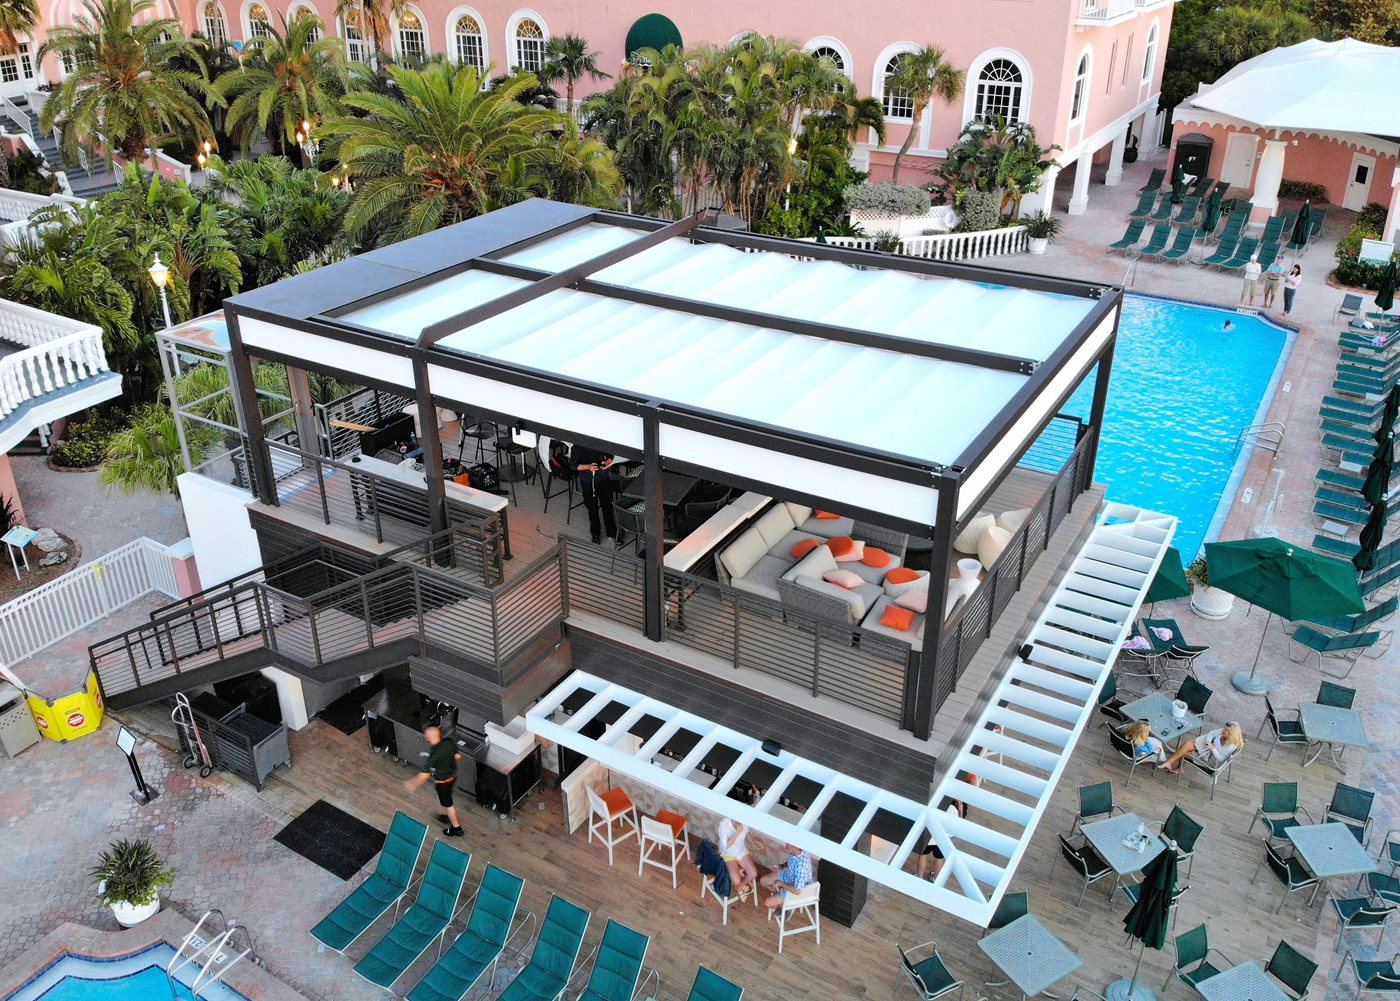 Flat,-Custom-B-Space-at-The-Don-CeSar-Hotel-in-St-Pete-Beach,-FL-by-Miami-Awning-Co-(3).jpg